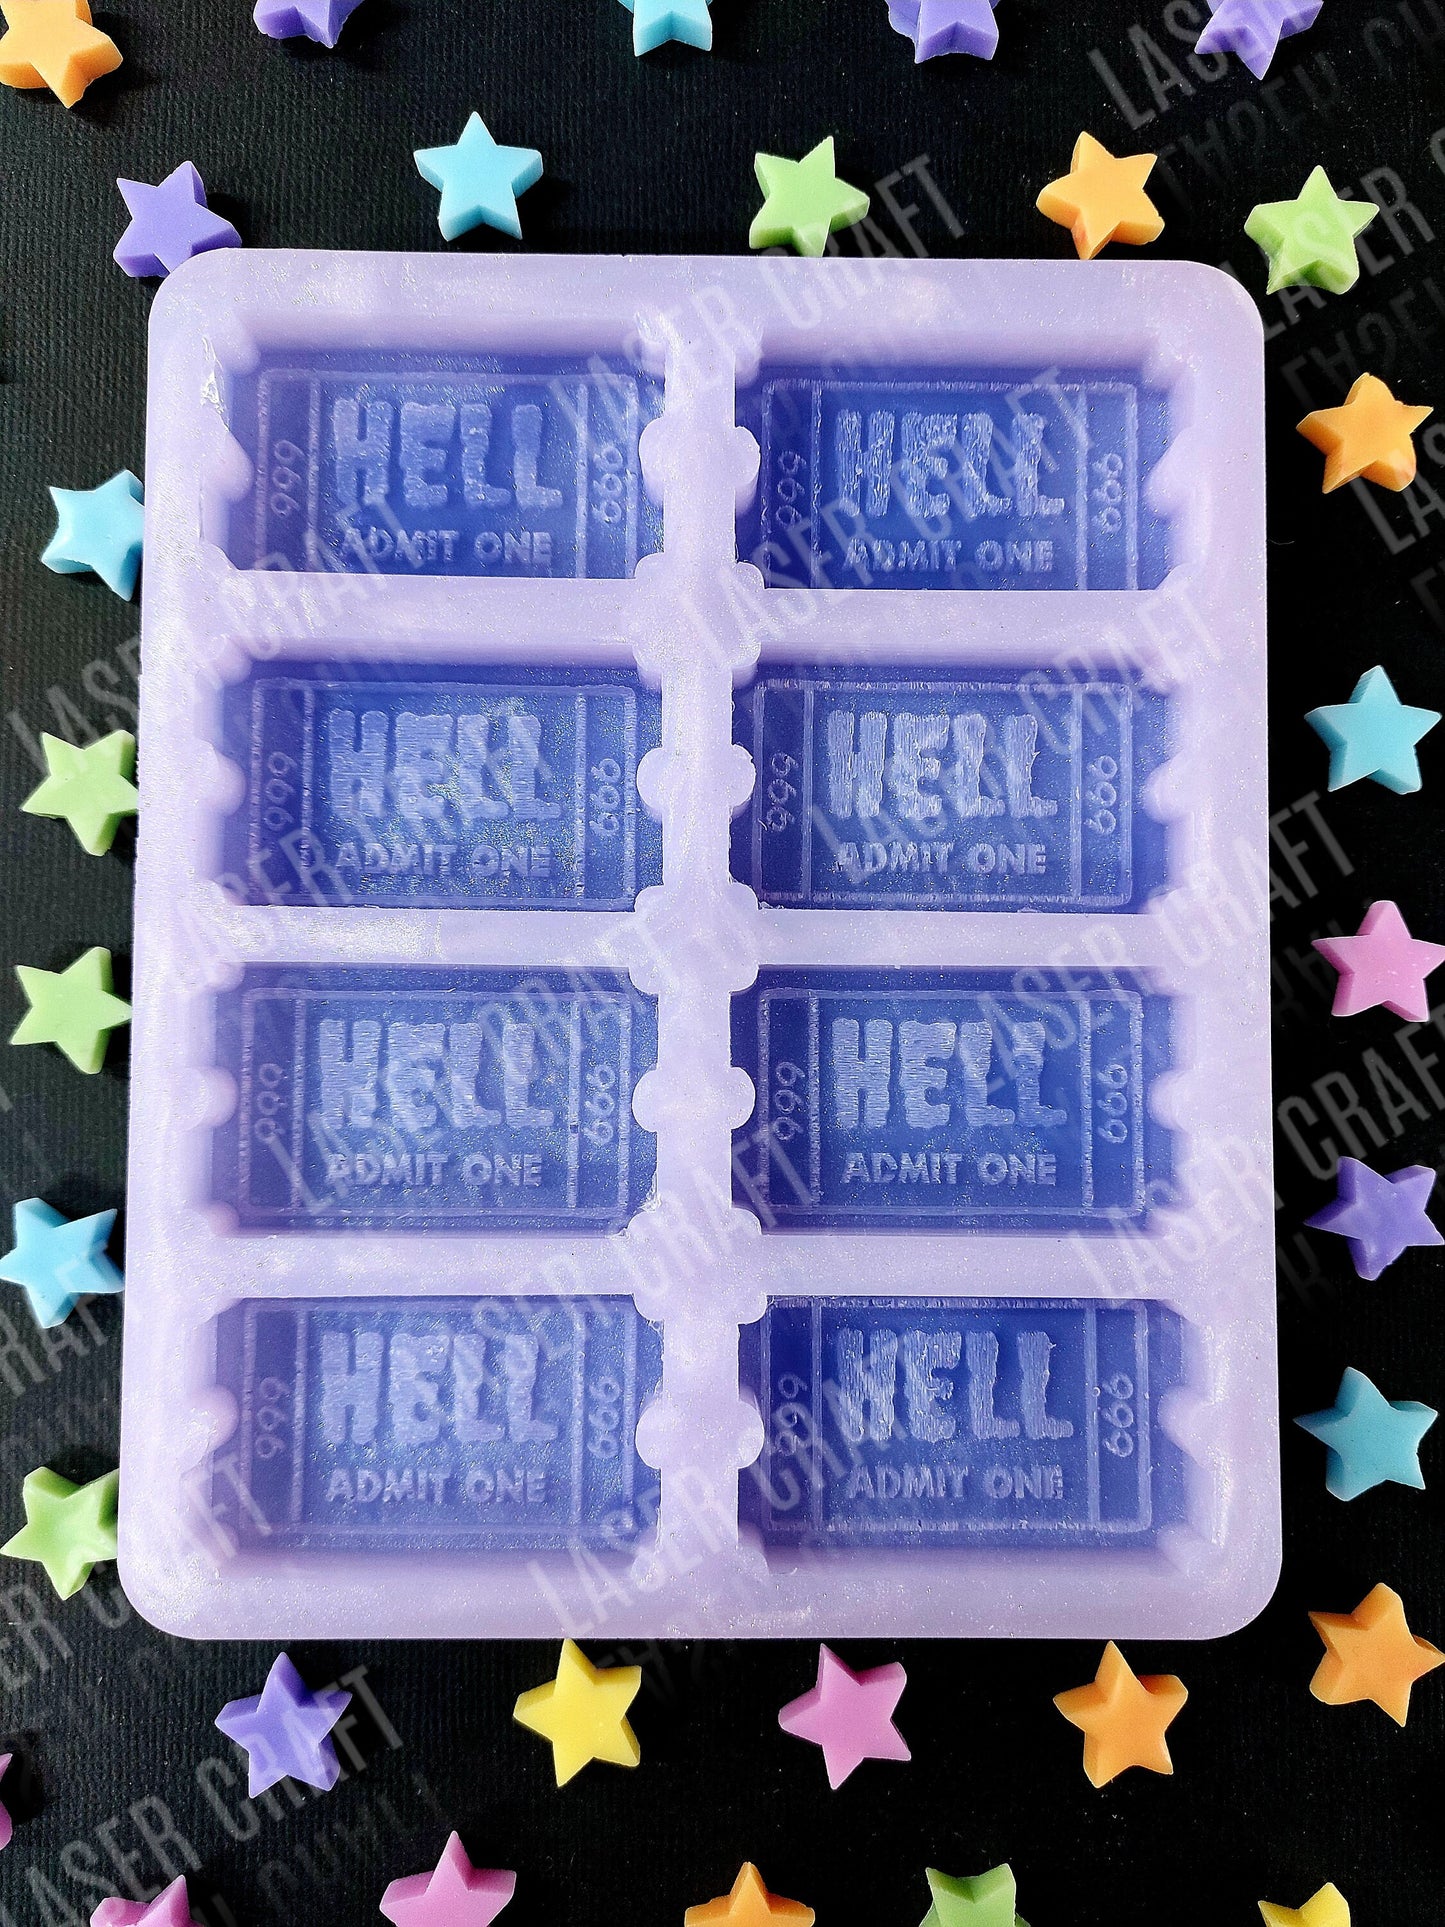 Hell Ticket Silicone Mould for wax, resin and more